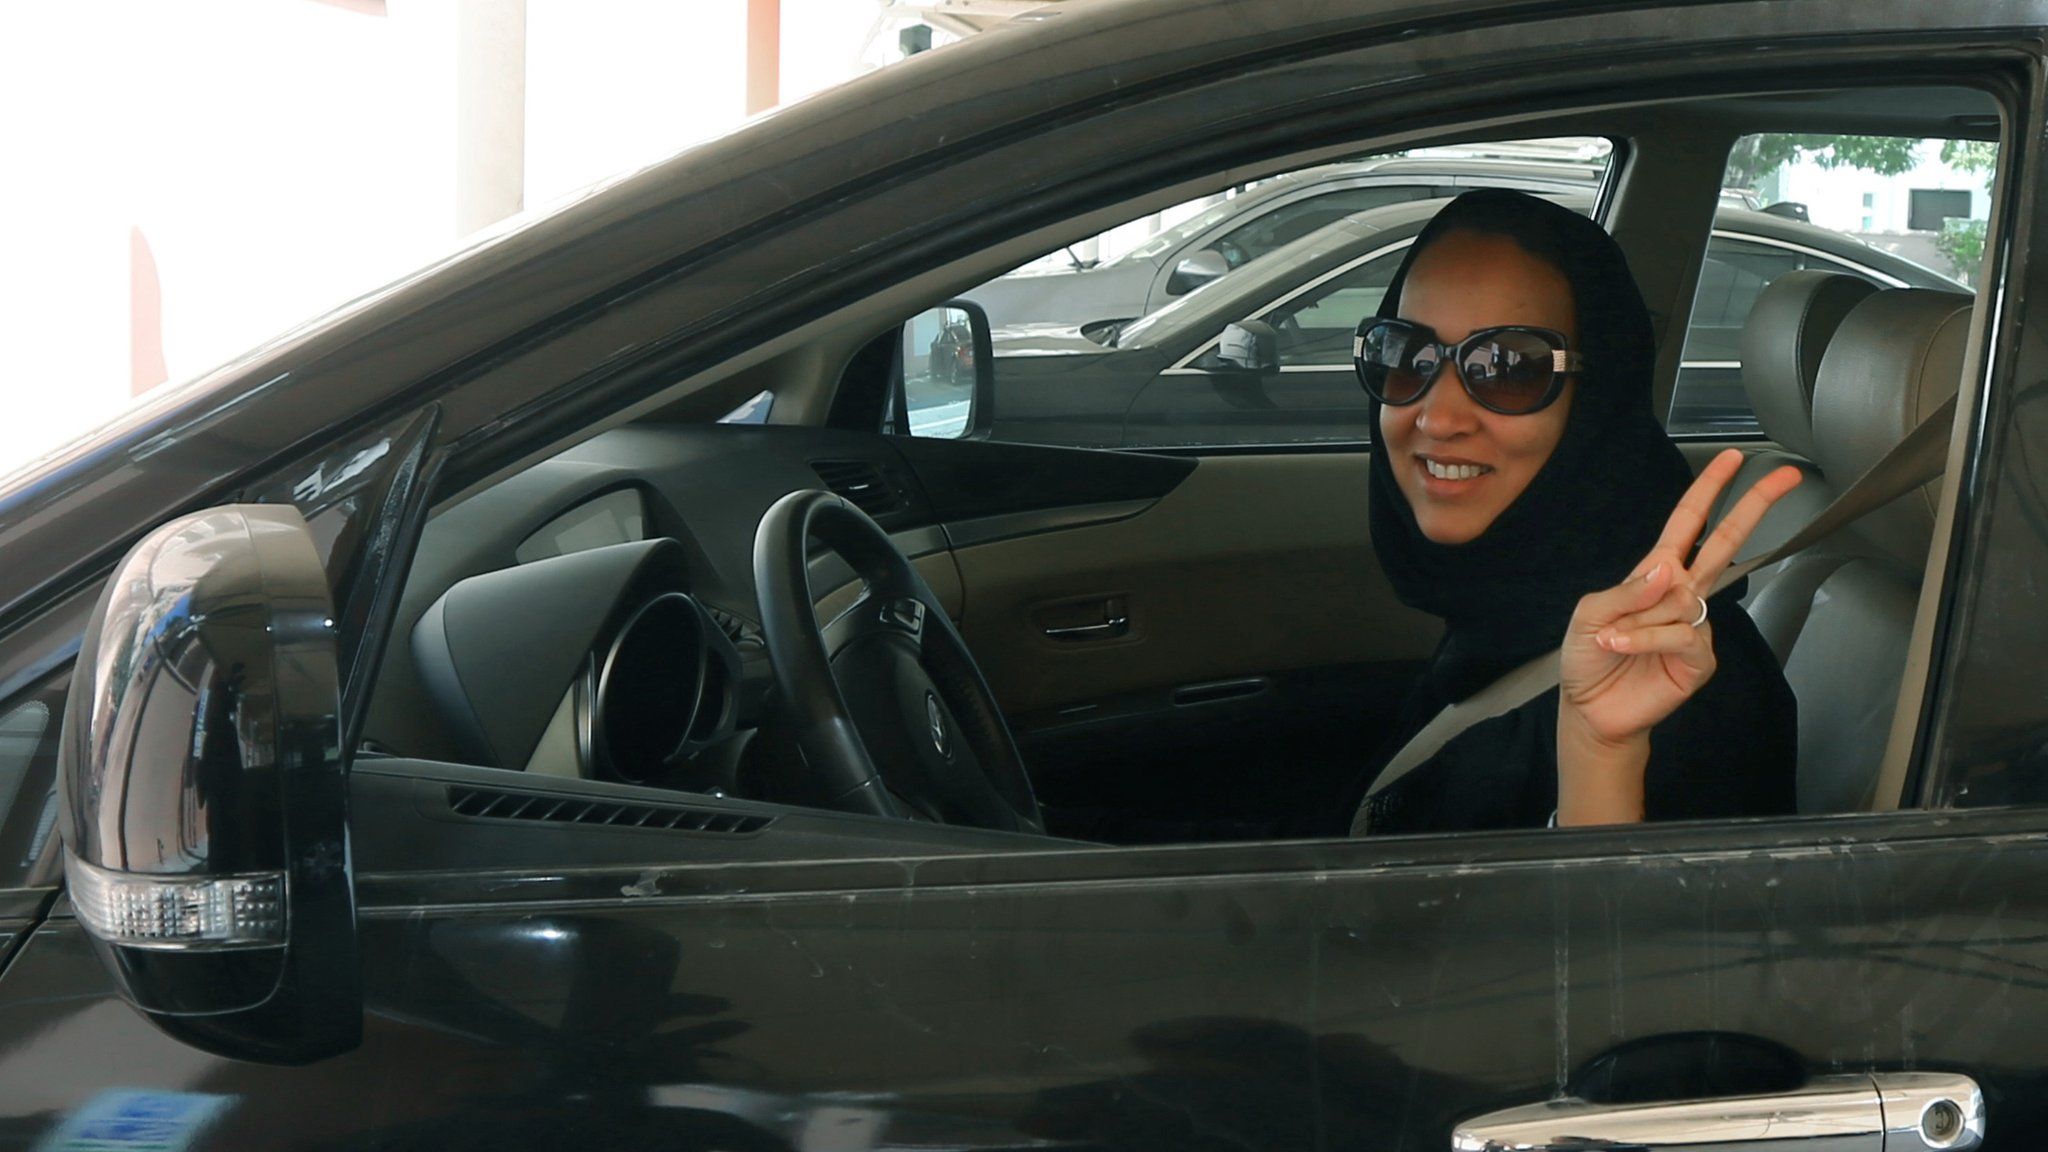 File photo: Saudi activist Manal Al Sharif poses in a car in Dubai, in solidarity with a planned protest in Saudi Arabia, 22 October 2013